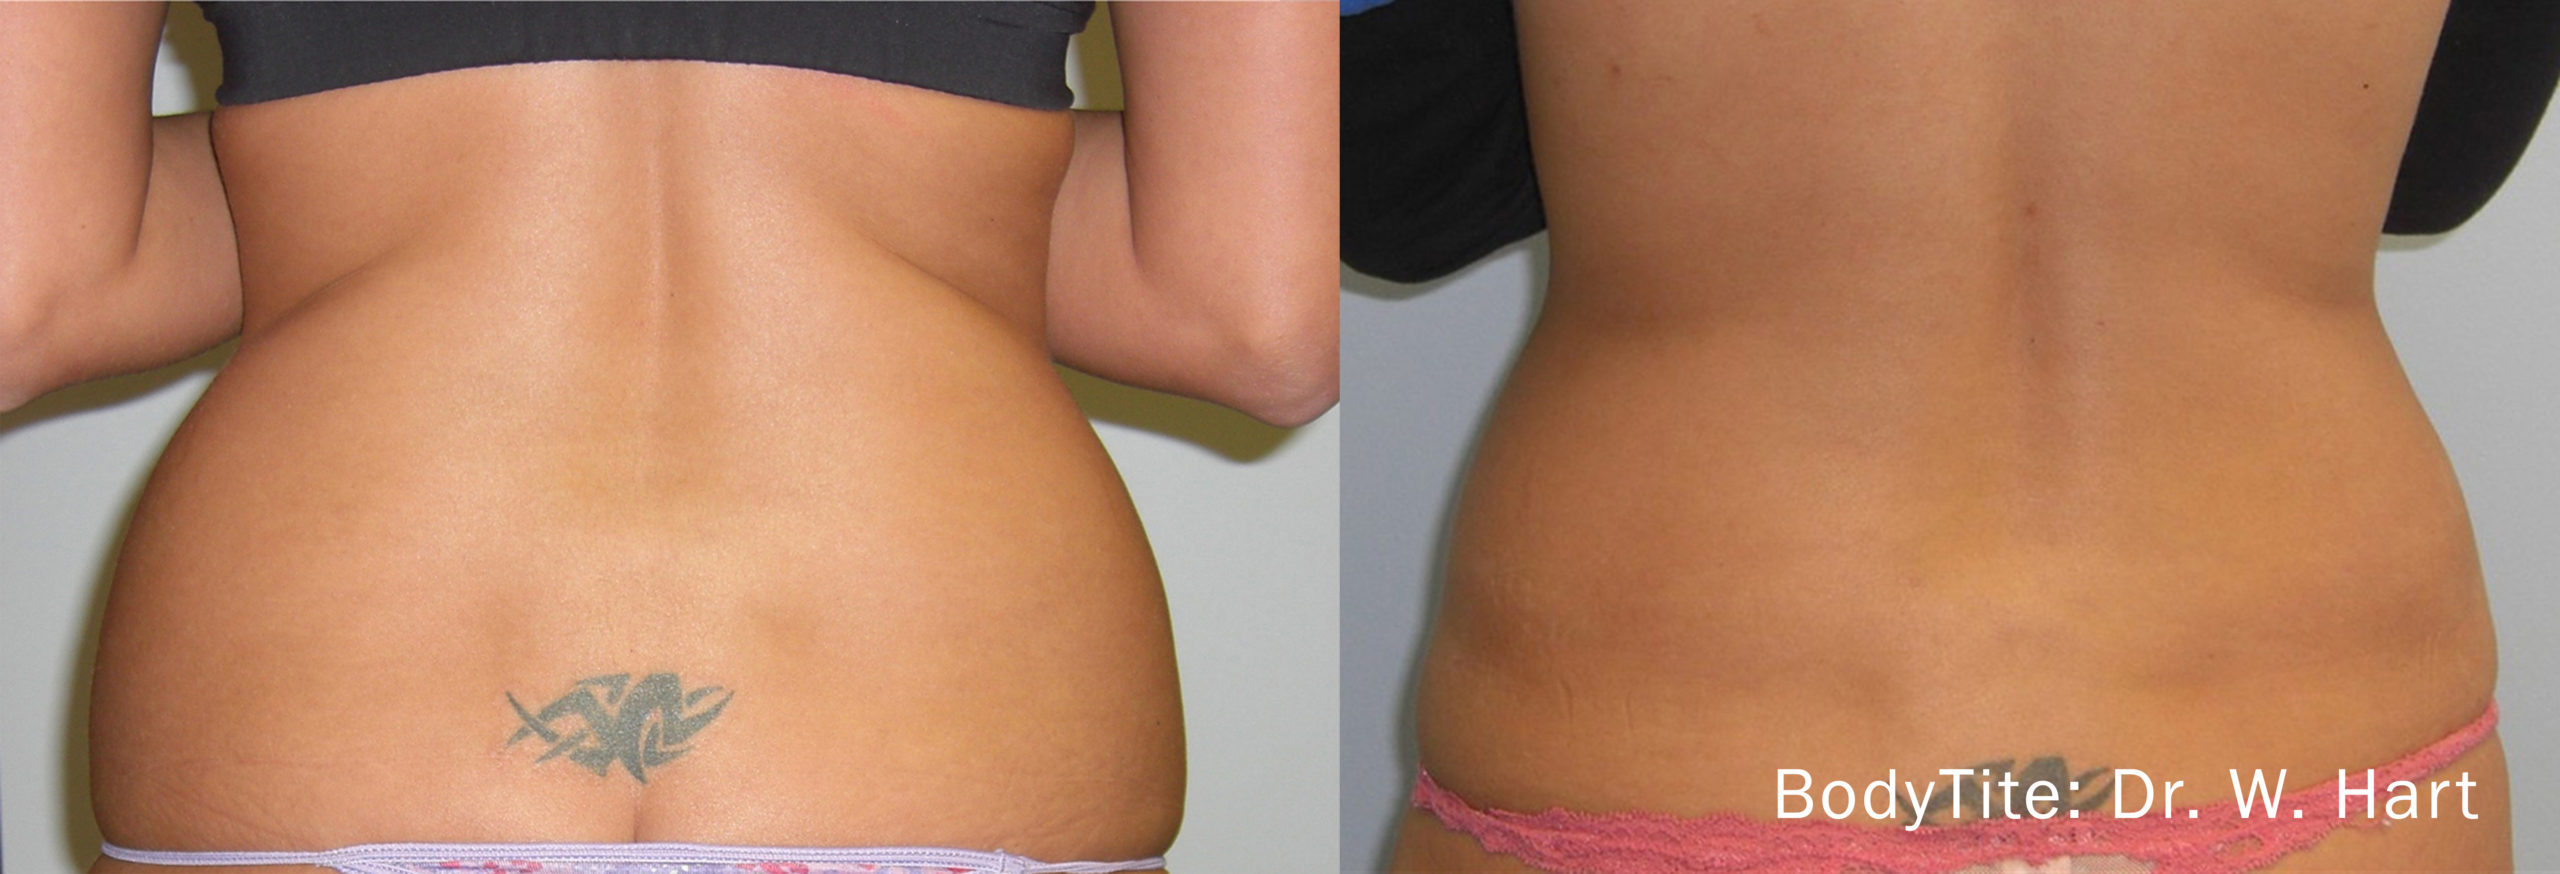 Bodytite skin tightening treatment before and after of a patient back